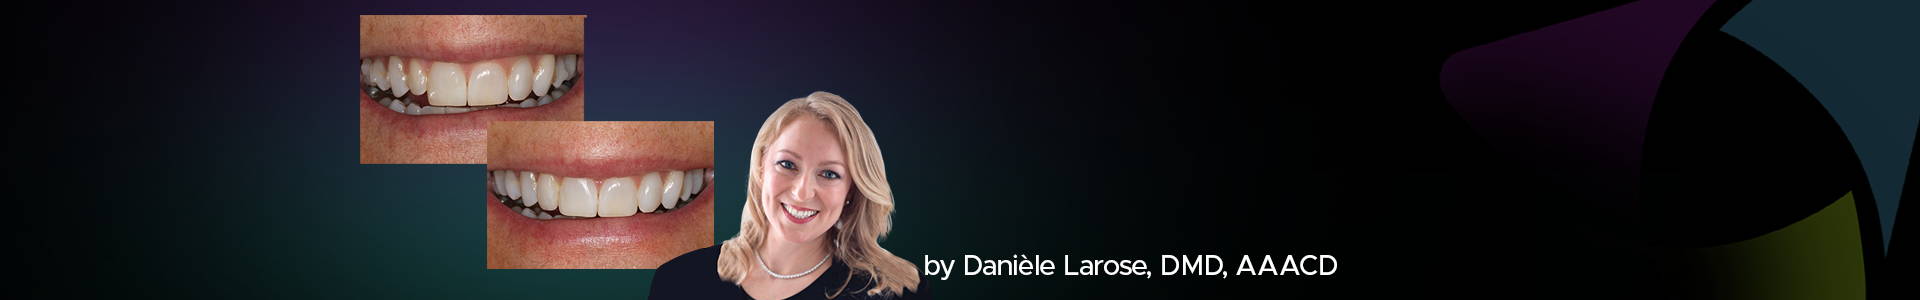 blog banner featuring Daniele Larosa and two clinical images